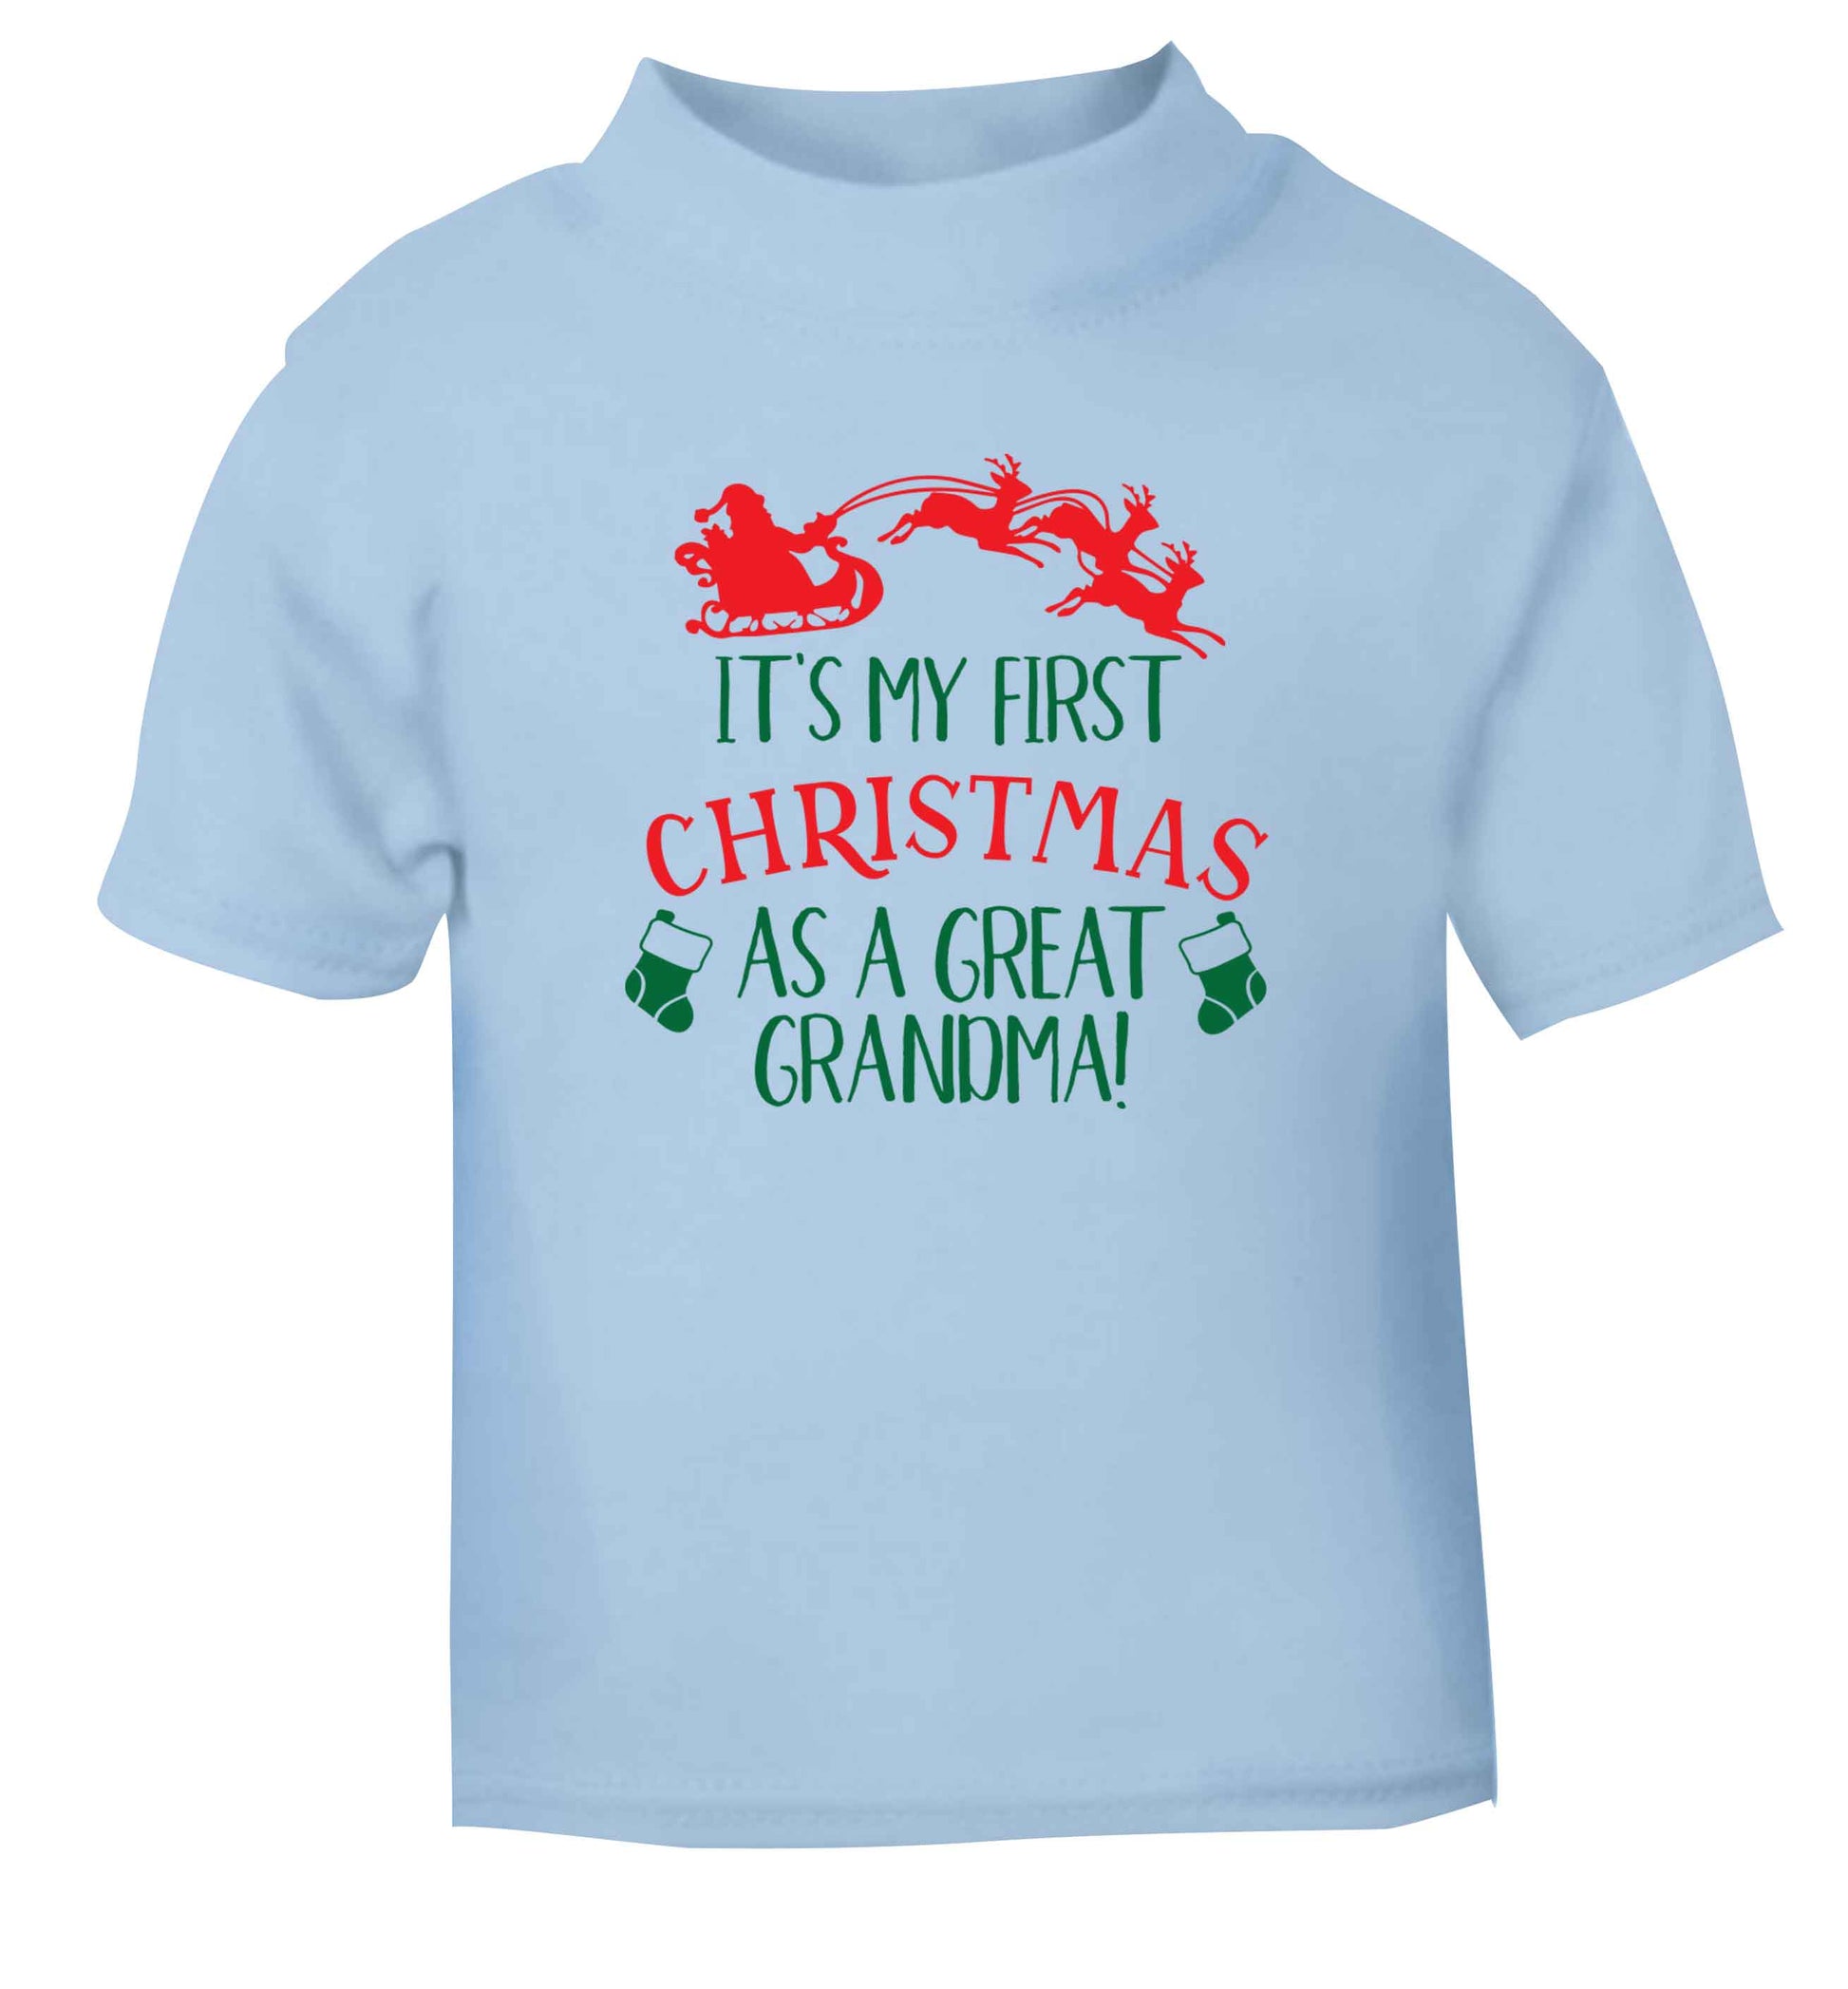 It's my first Christmas as a great grandma! light blue Baby Toddler Tshirt 2 Years